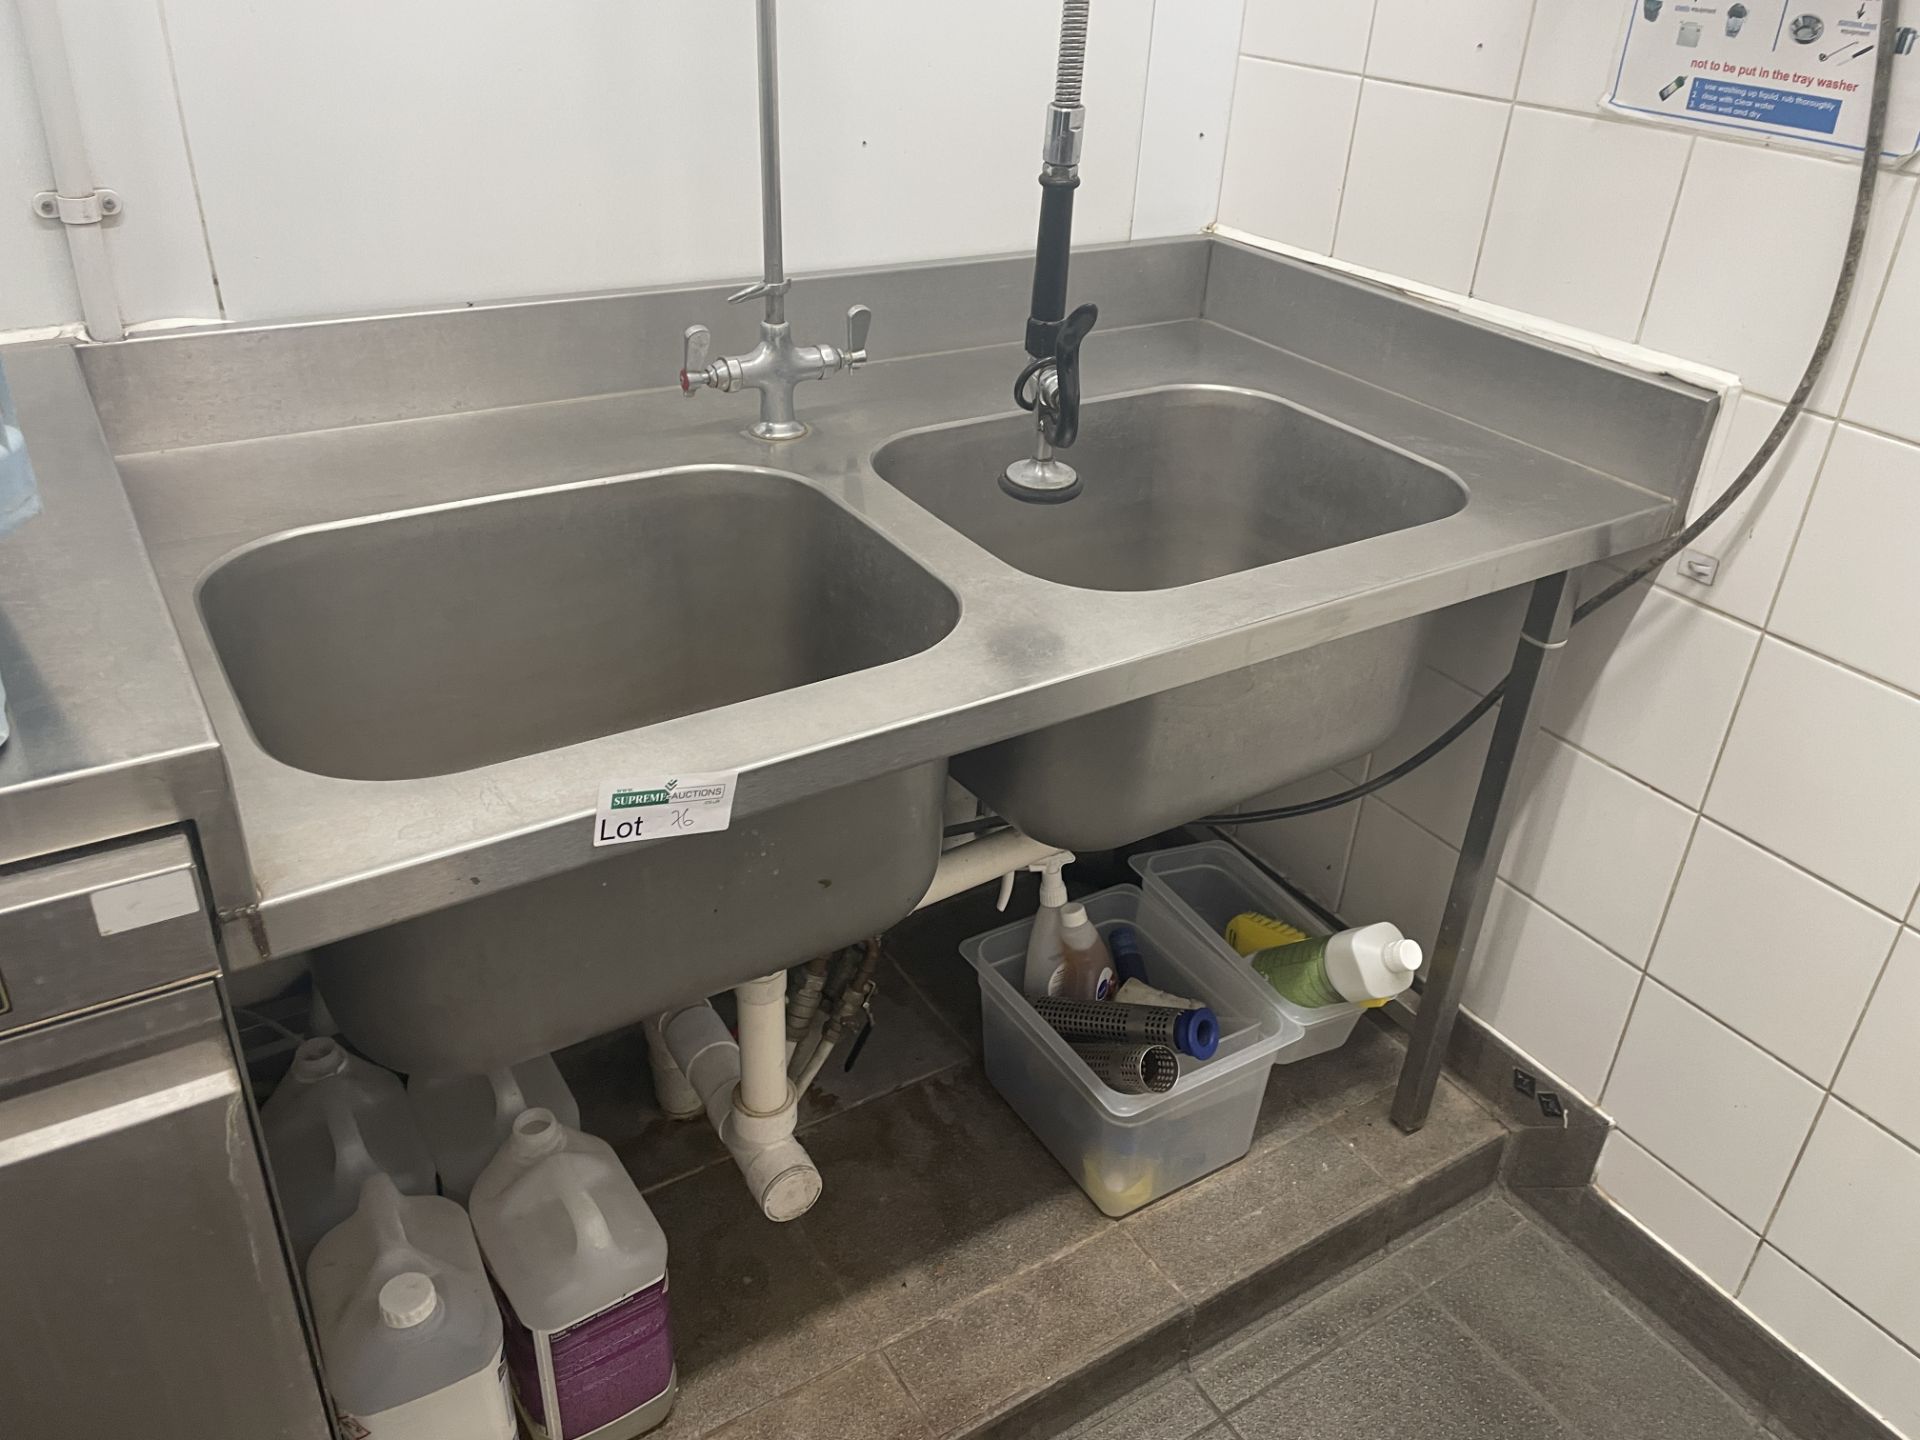 LARGE DOUBLE BASIN STAINLESS STEEL CLEANING UNIT WITH EXPANDABLE TAP (SIZE: 190(L) X 90(D) CM